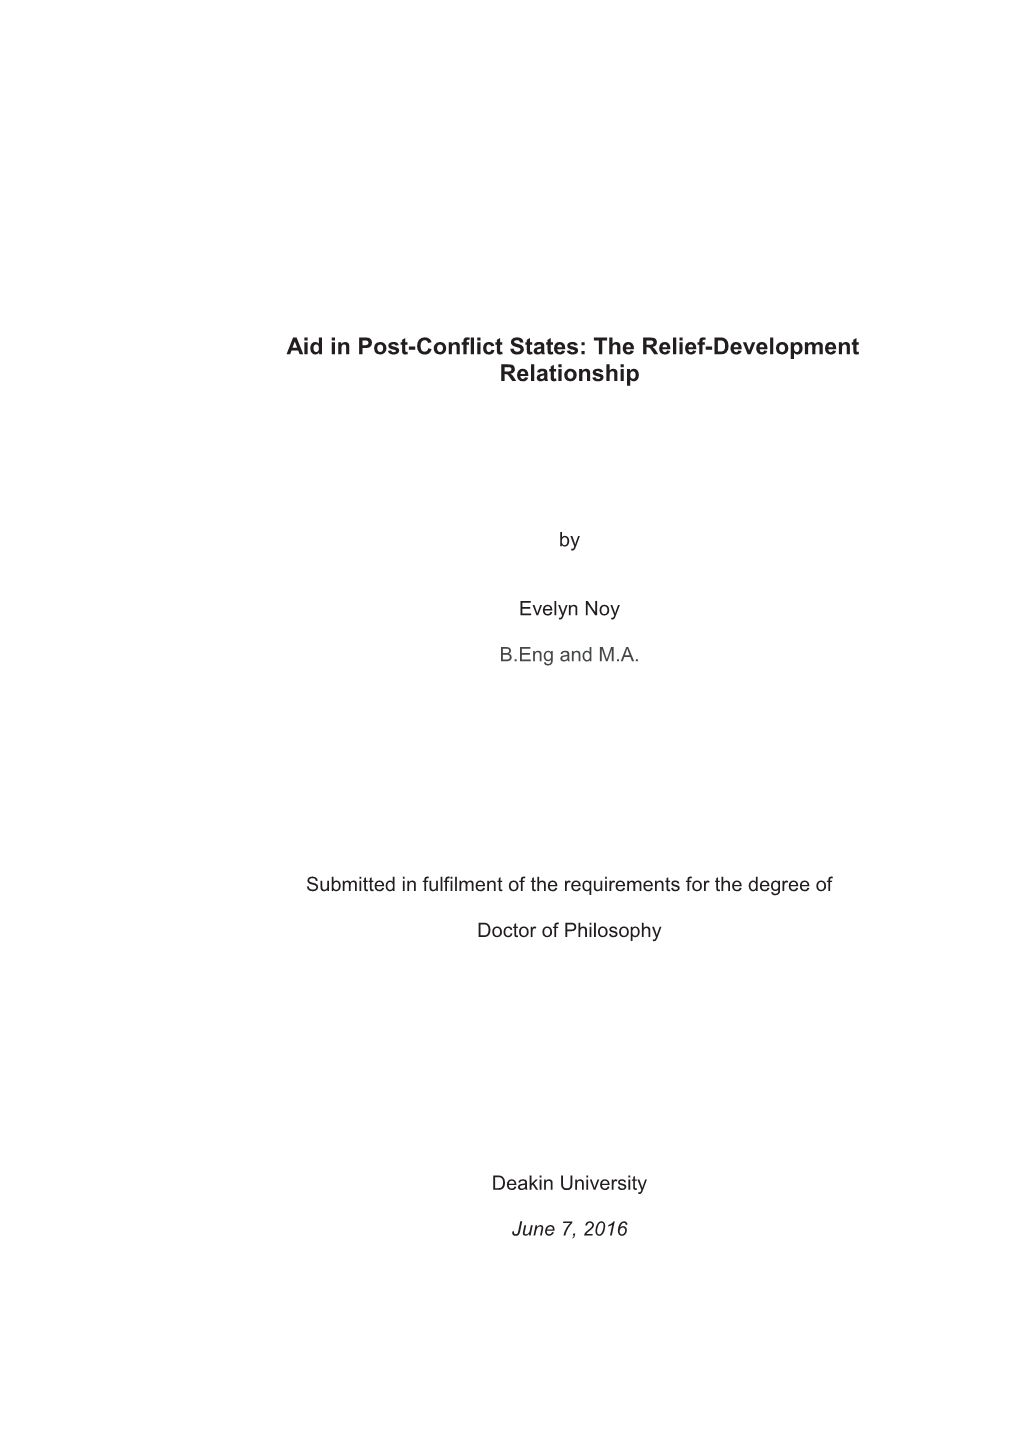 Lit Review: the Relief and Development Relationship